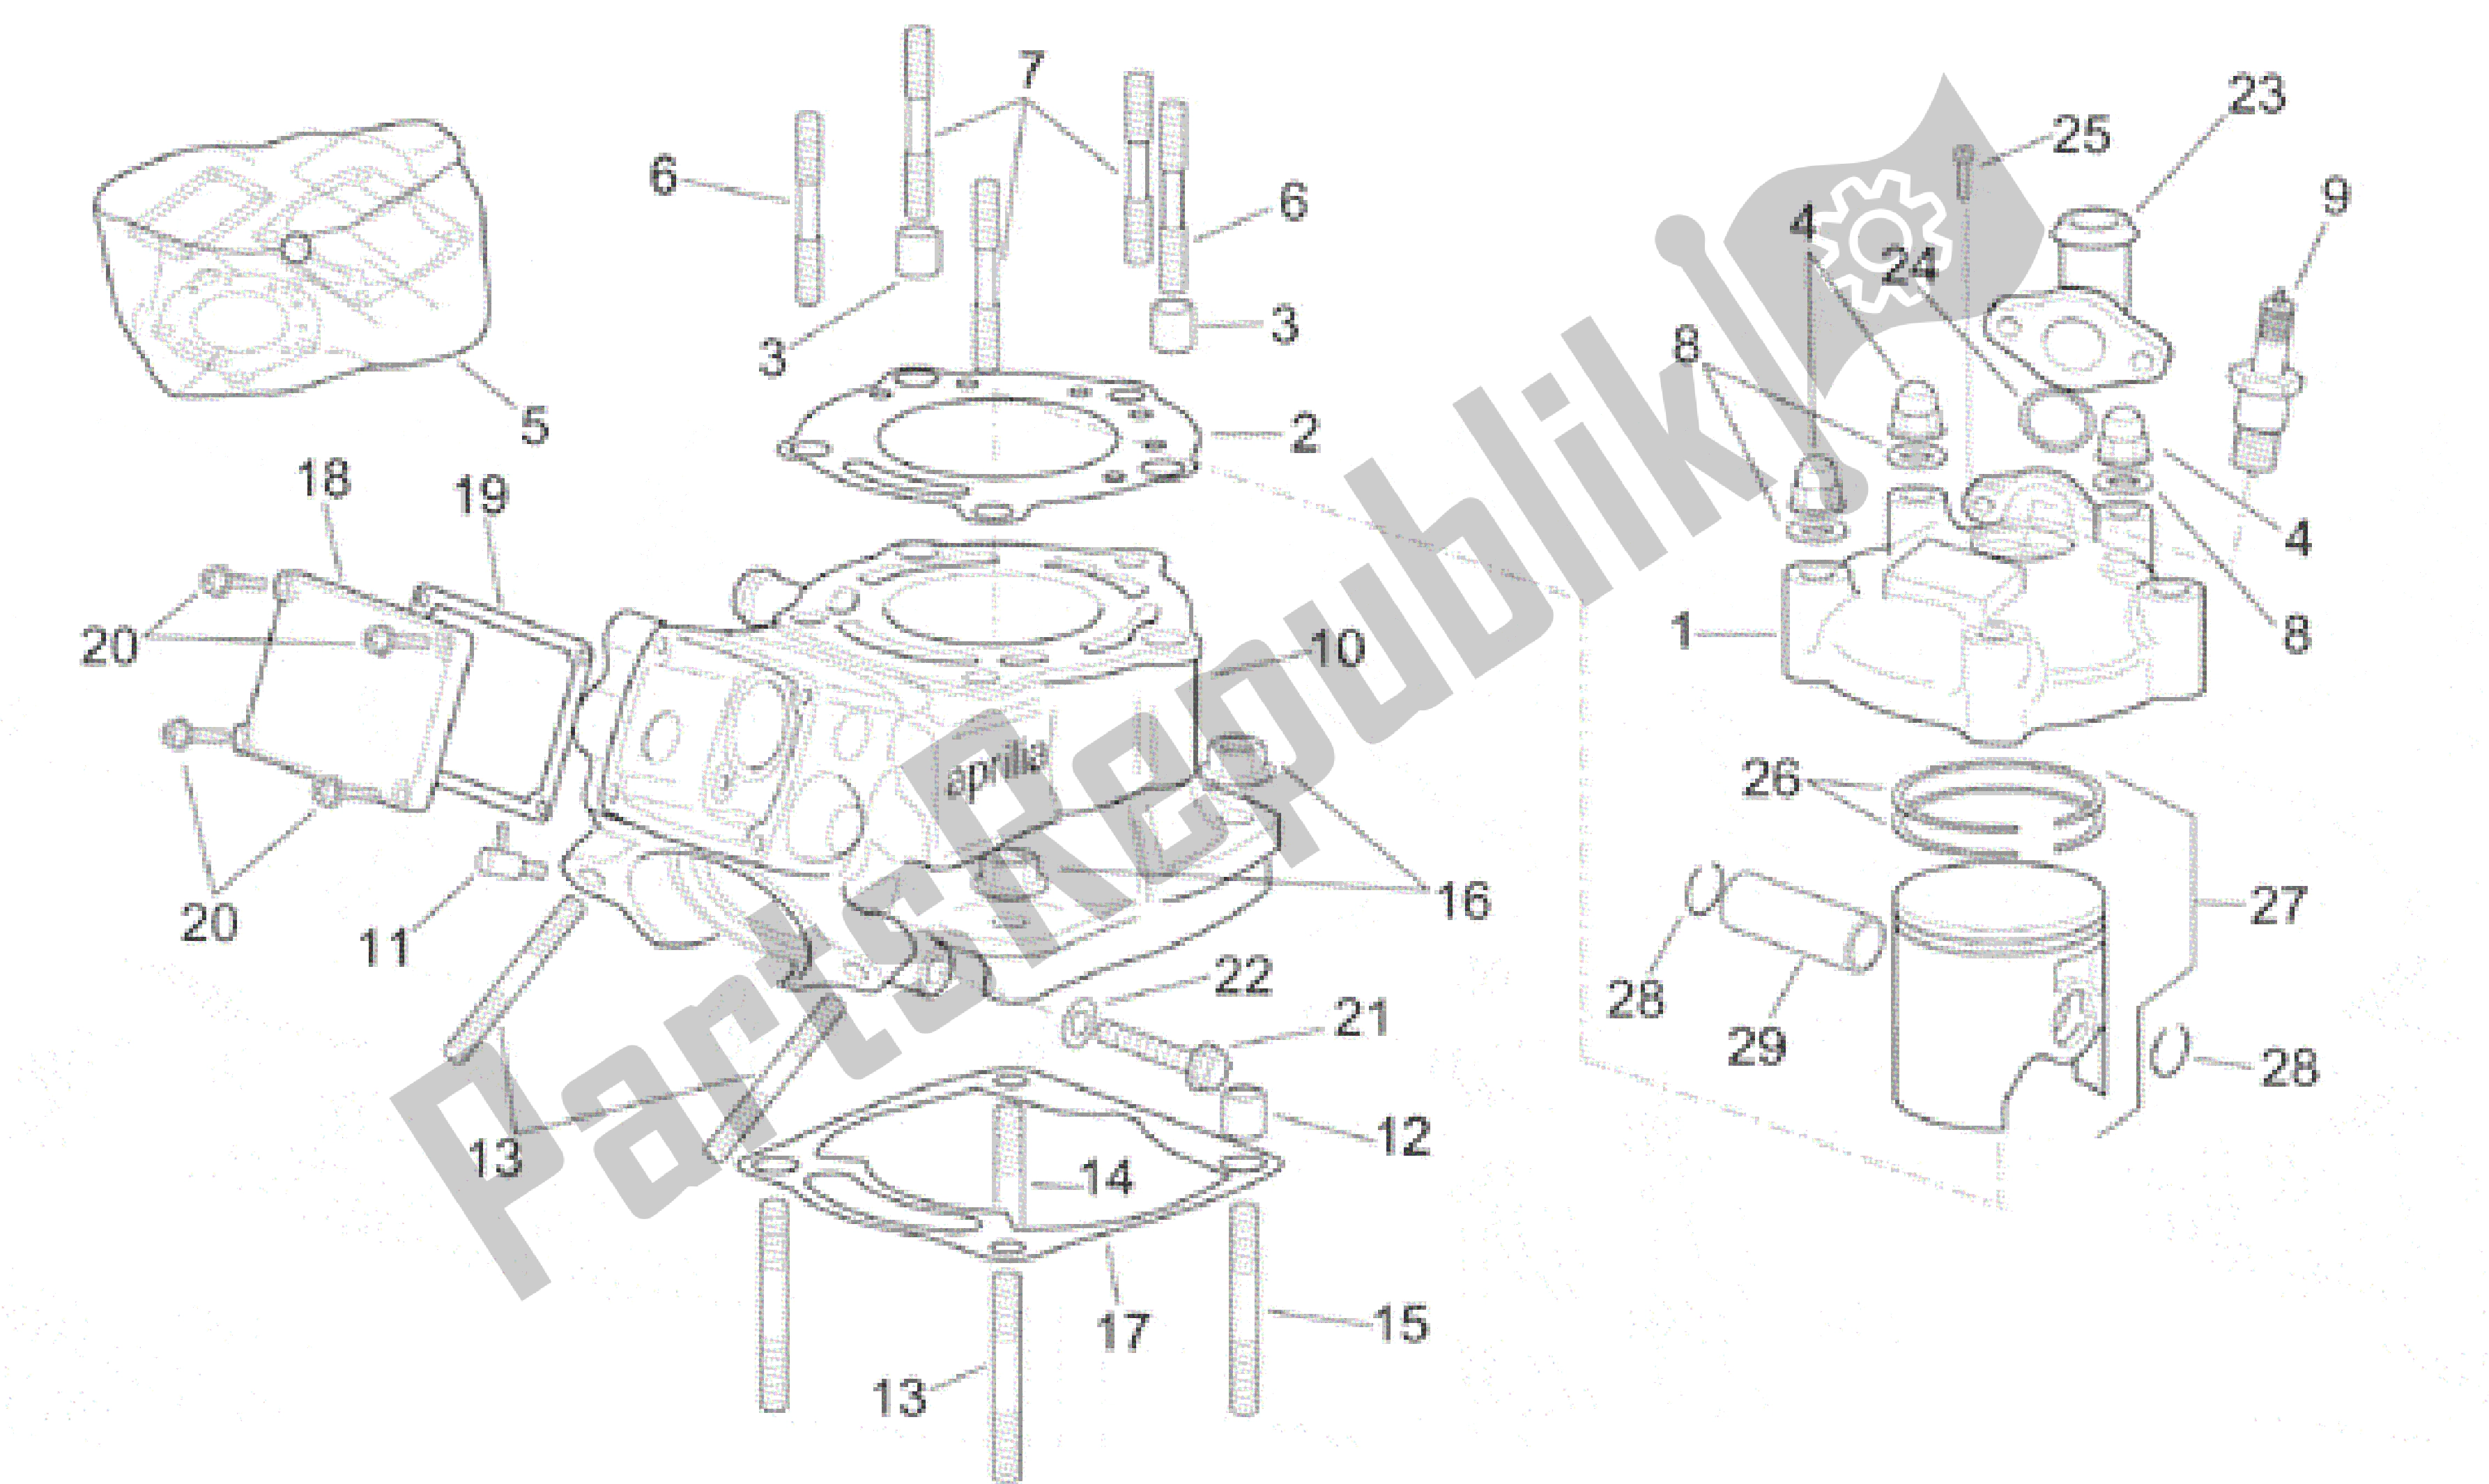 All parts for the Vertical Cylinder Assembly of the Aprilia RS 250 1998 - 2001